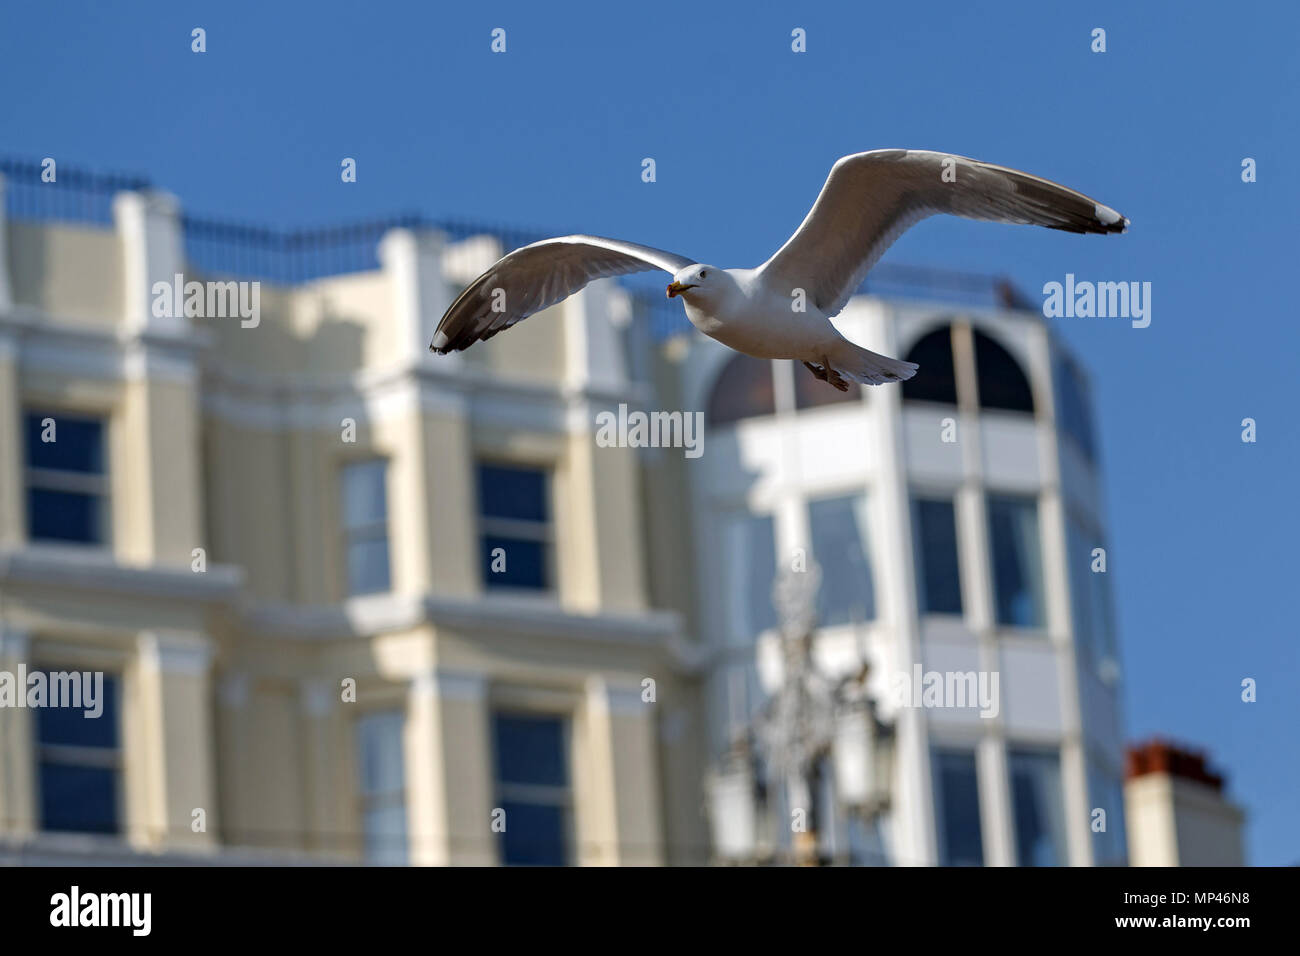 A seagull in flight in front of seafront buildings in Brighton, East Sussex, UK. Stock Photo